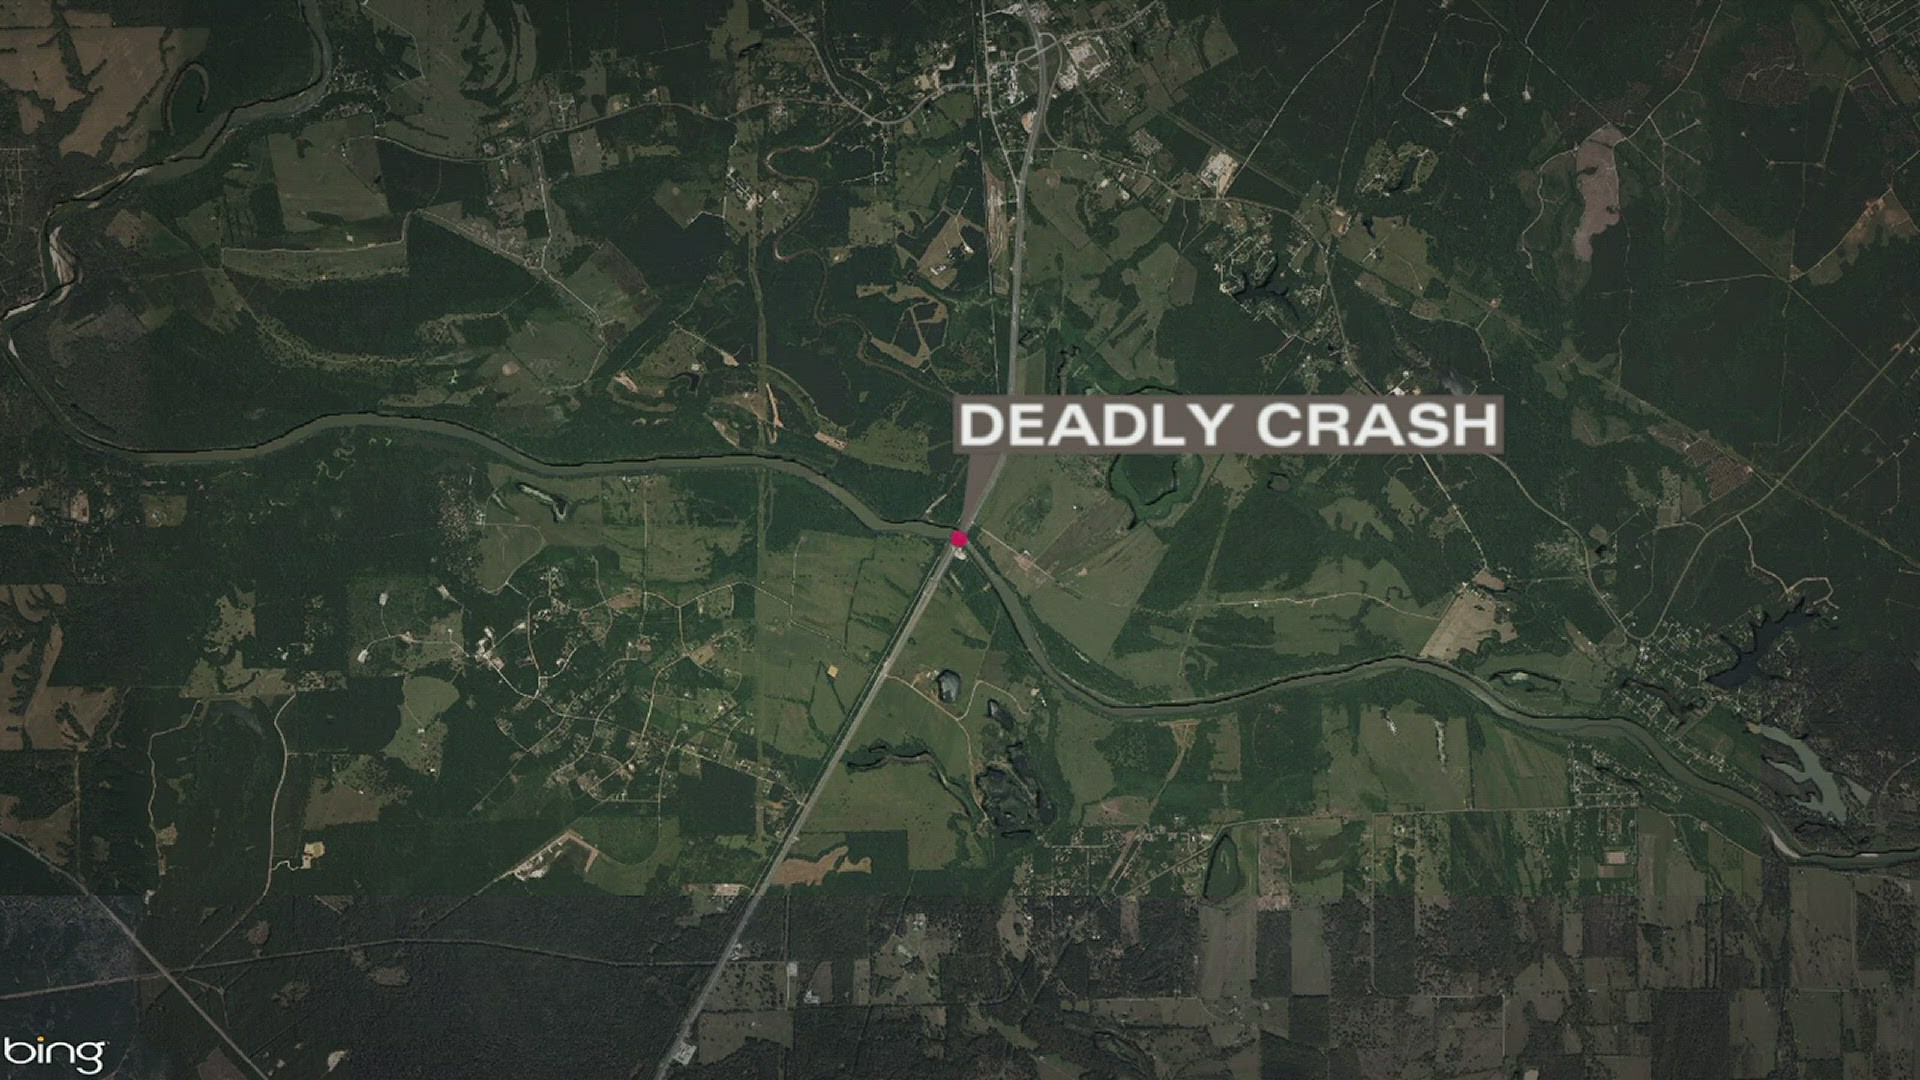 The crash happened around 8:20 a.m. on Tuesday, January 15 on U.S. Highway 59 south, on the Trinity River Bridge.